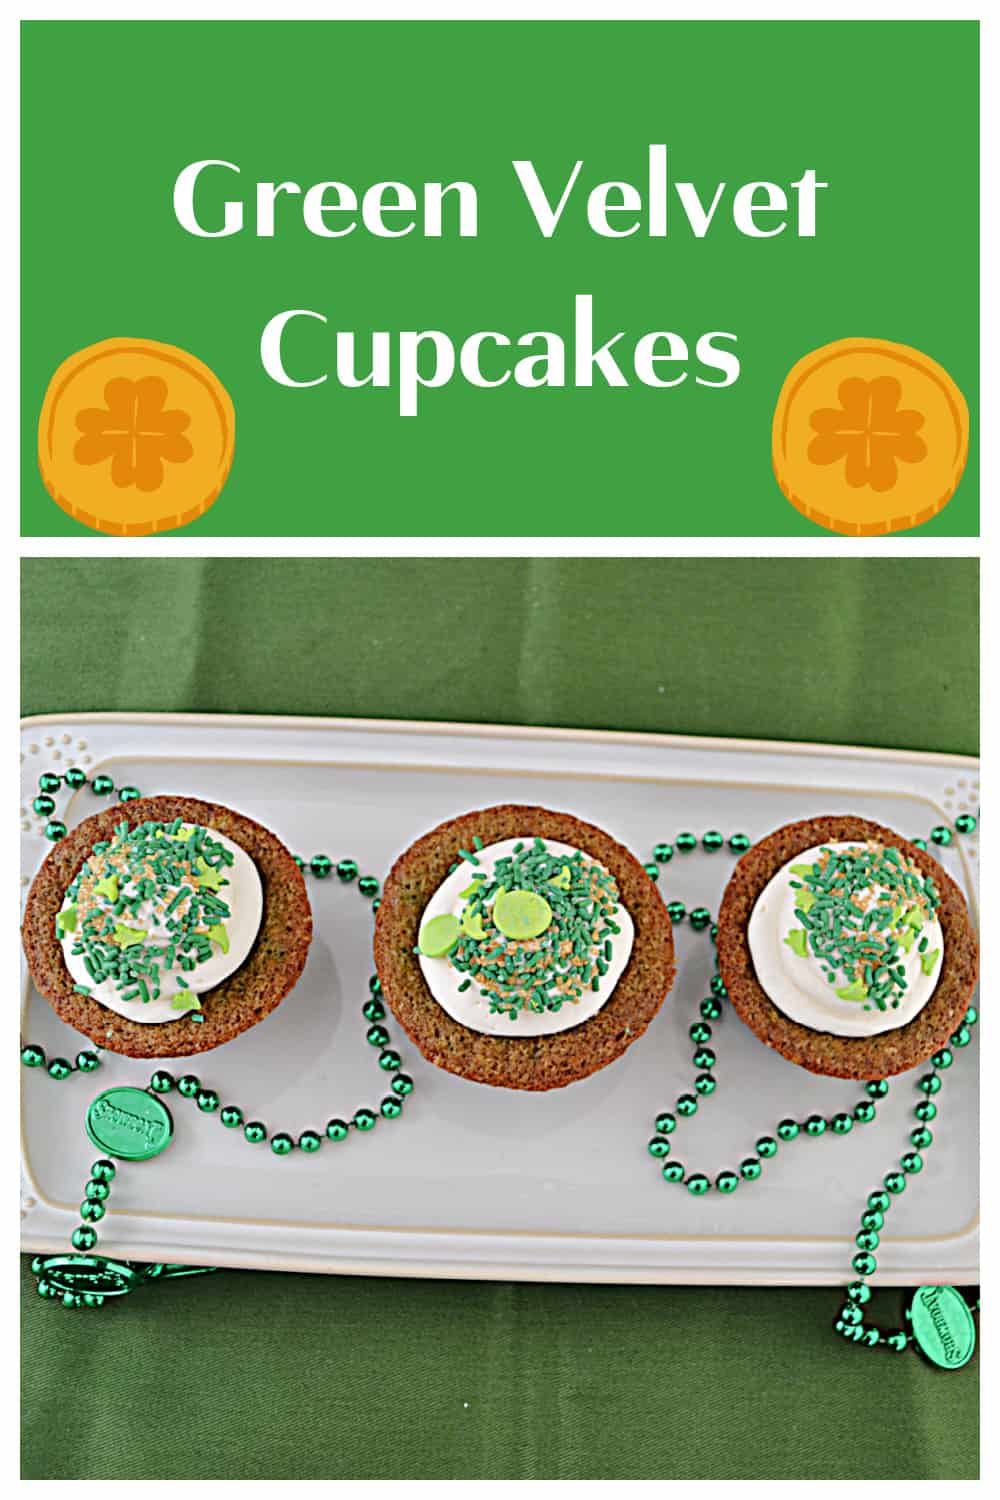 Pin Image:   Text title, a platter of three green velvet cupcakes.